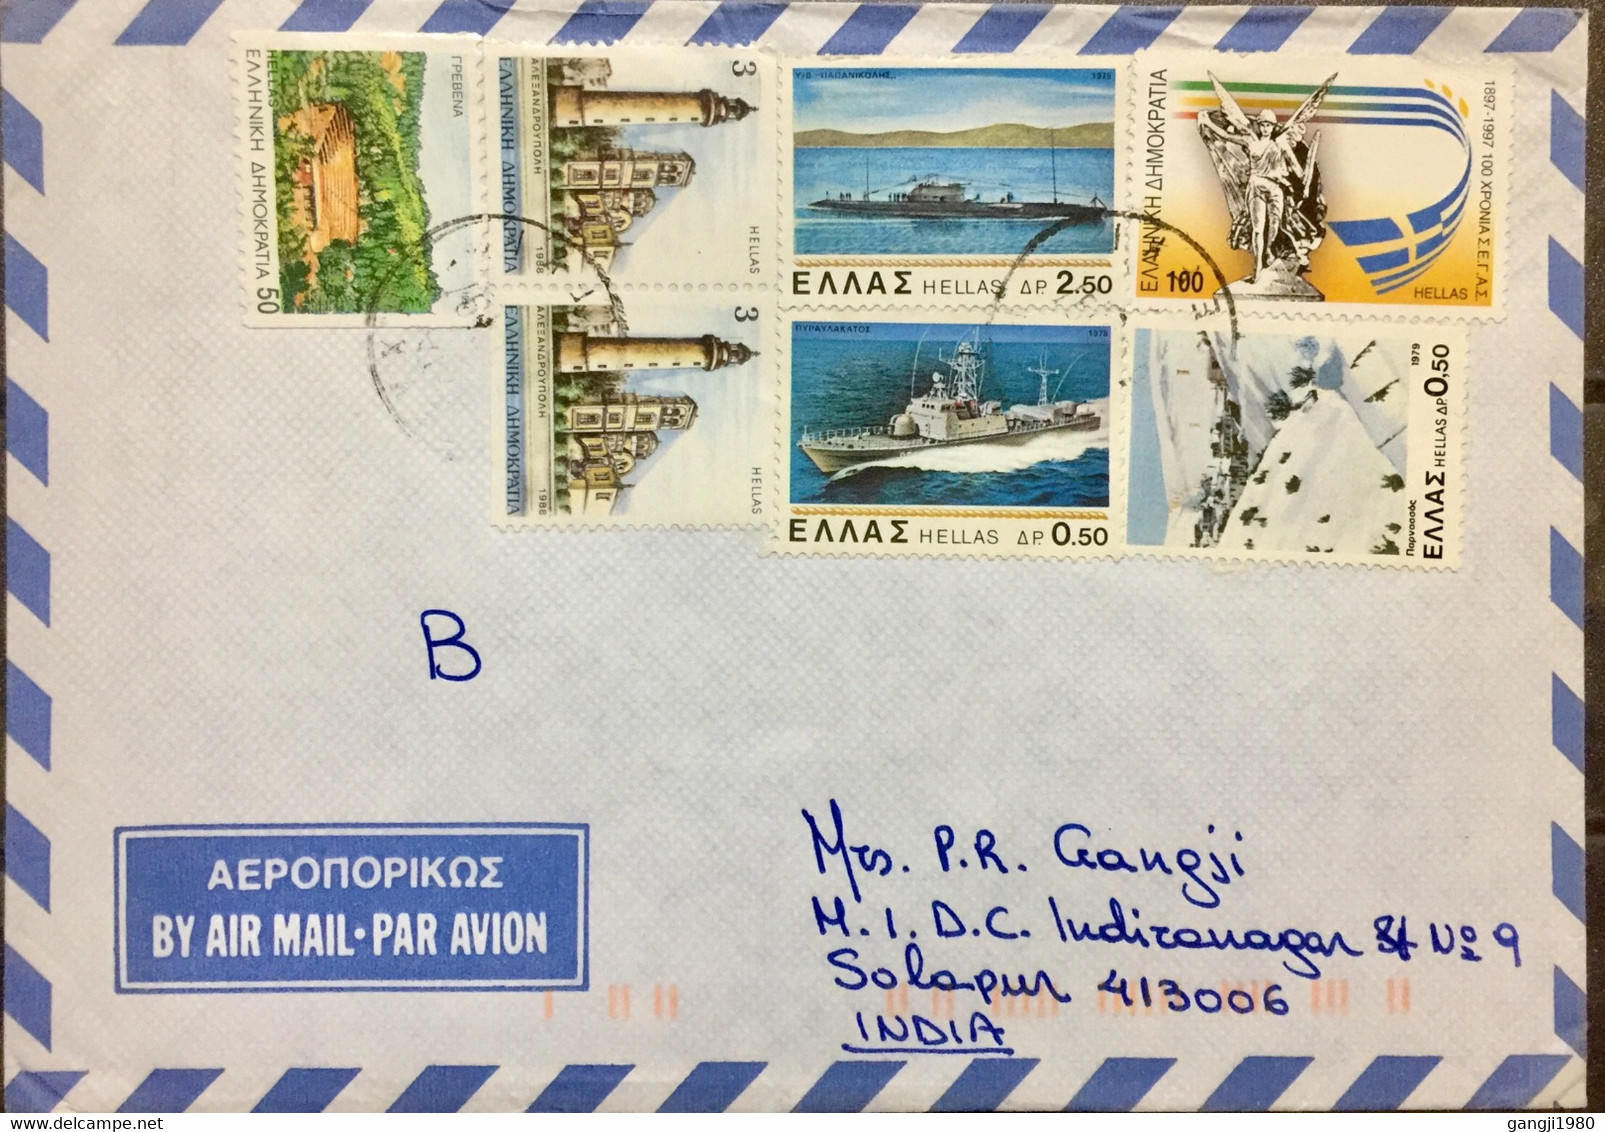 GREECE 1997, USED AIRMAIL COVER TO INDIA,DIFFERENT 7 STAMPS SHIP ,LIGHT HOUSE,FLAG,NATURE,SNOW -MOUNTAIN STATUE, BUILDIN - 1941-45 Japanse Bezetting